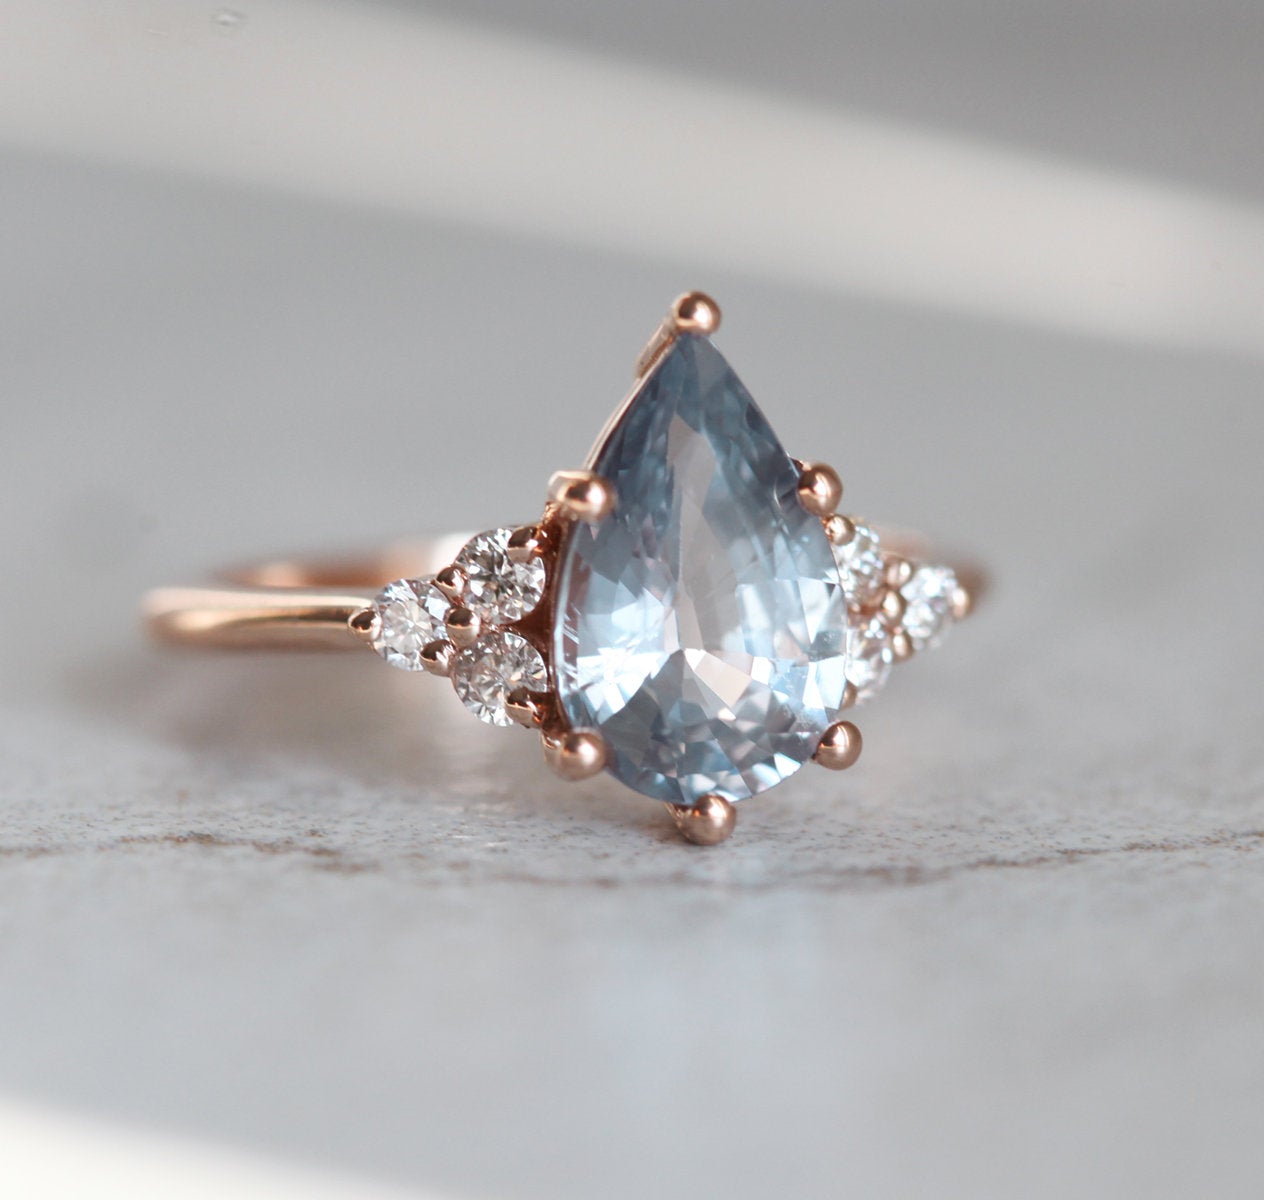 Pear-shaped blue sapphire ring with side diamonds